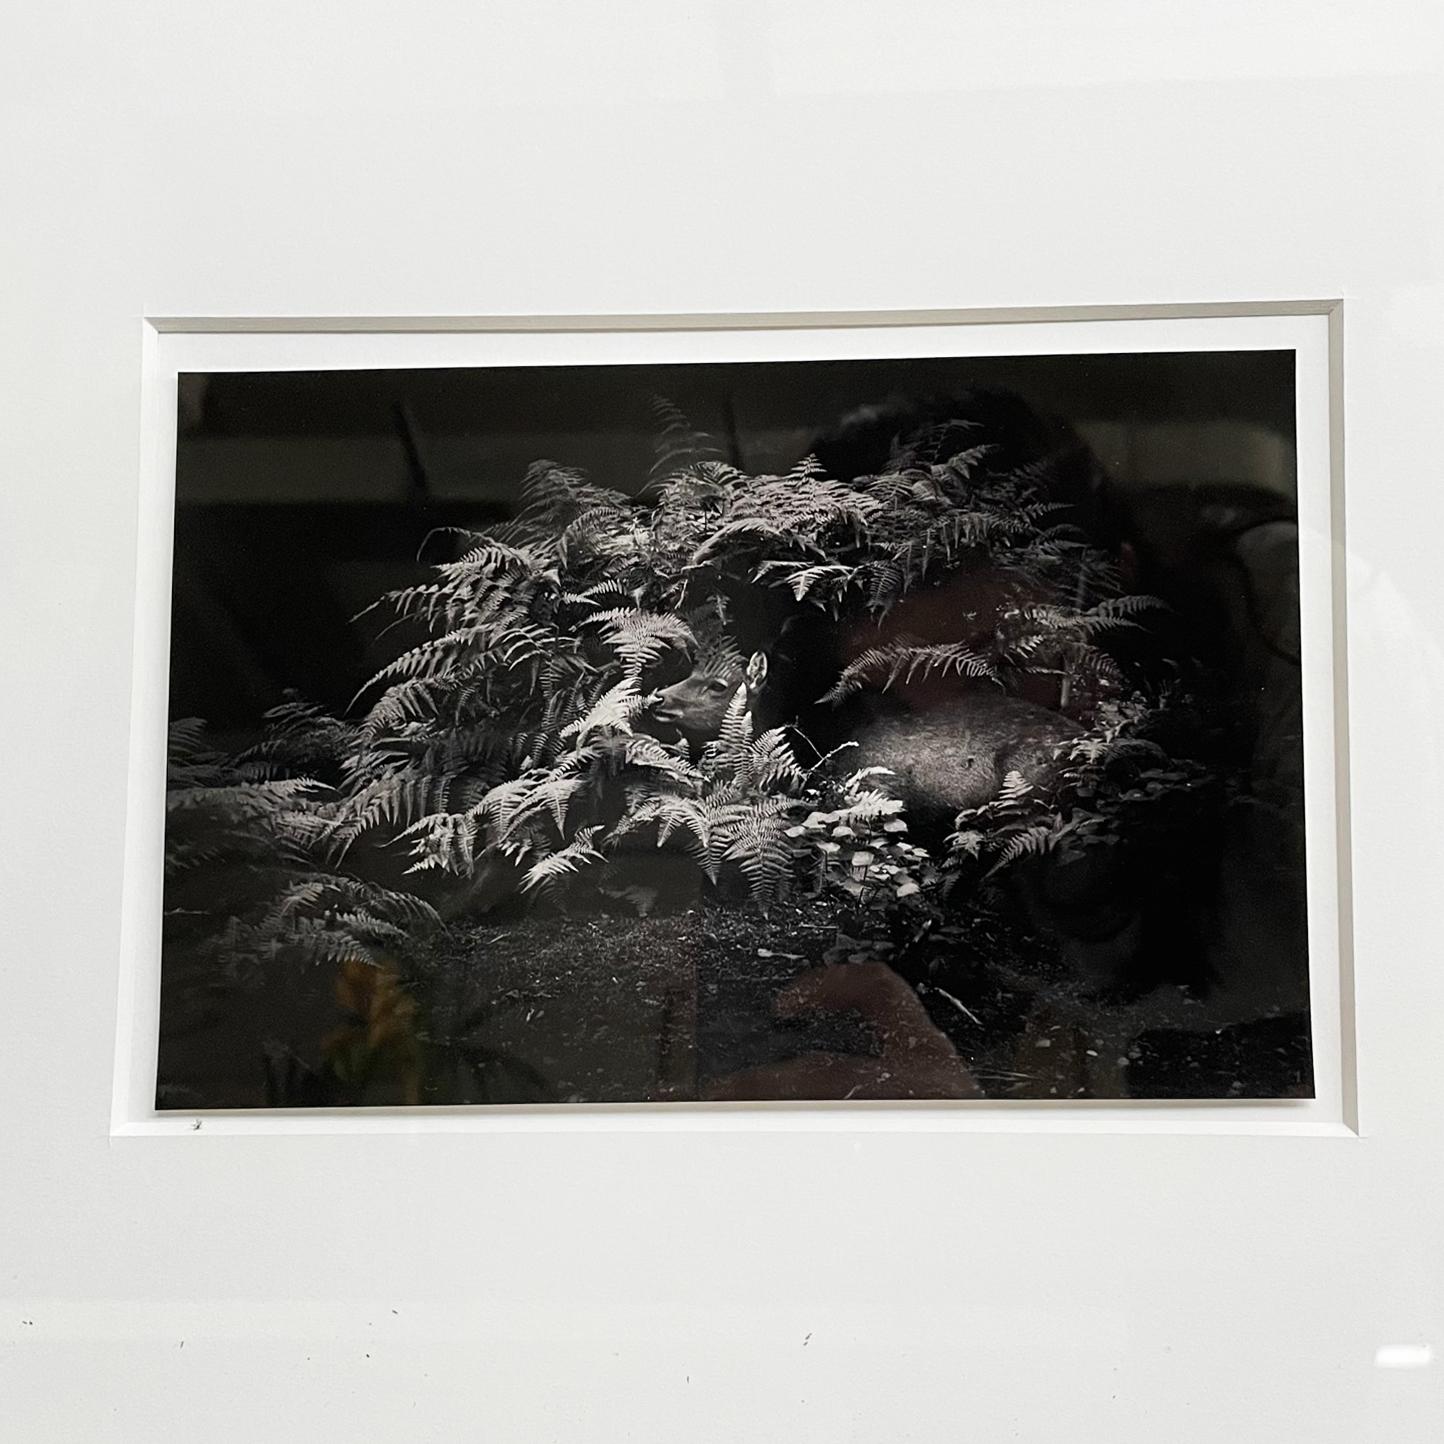 Japan post-modern Black and white photographic print Flow by Masao Yamamoto, 2009
Black and white photographic print entitled Flow, representing a fawn lying among plants. In a white painted wooden frame.
Created by Masao Yamamoto in 2009. Signed,